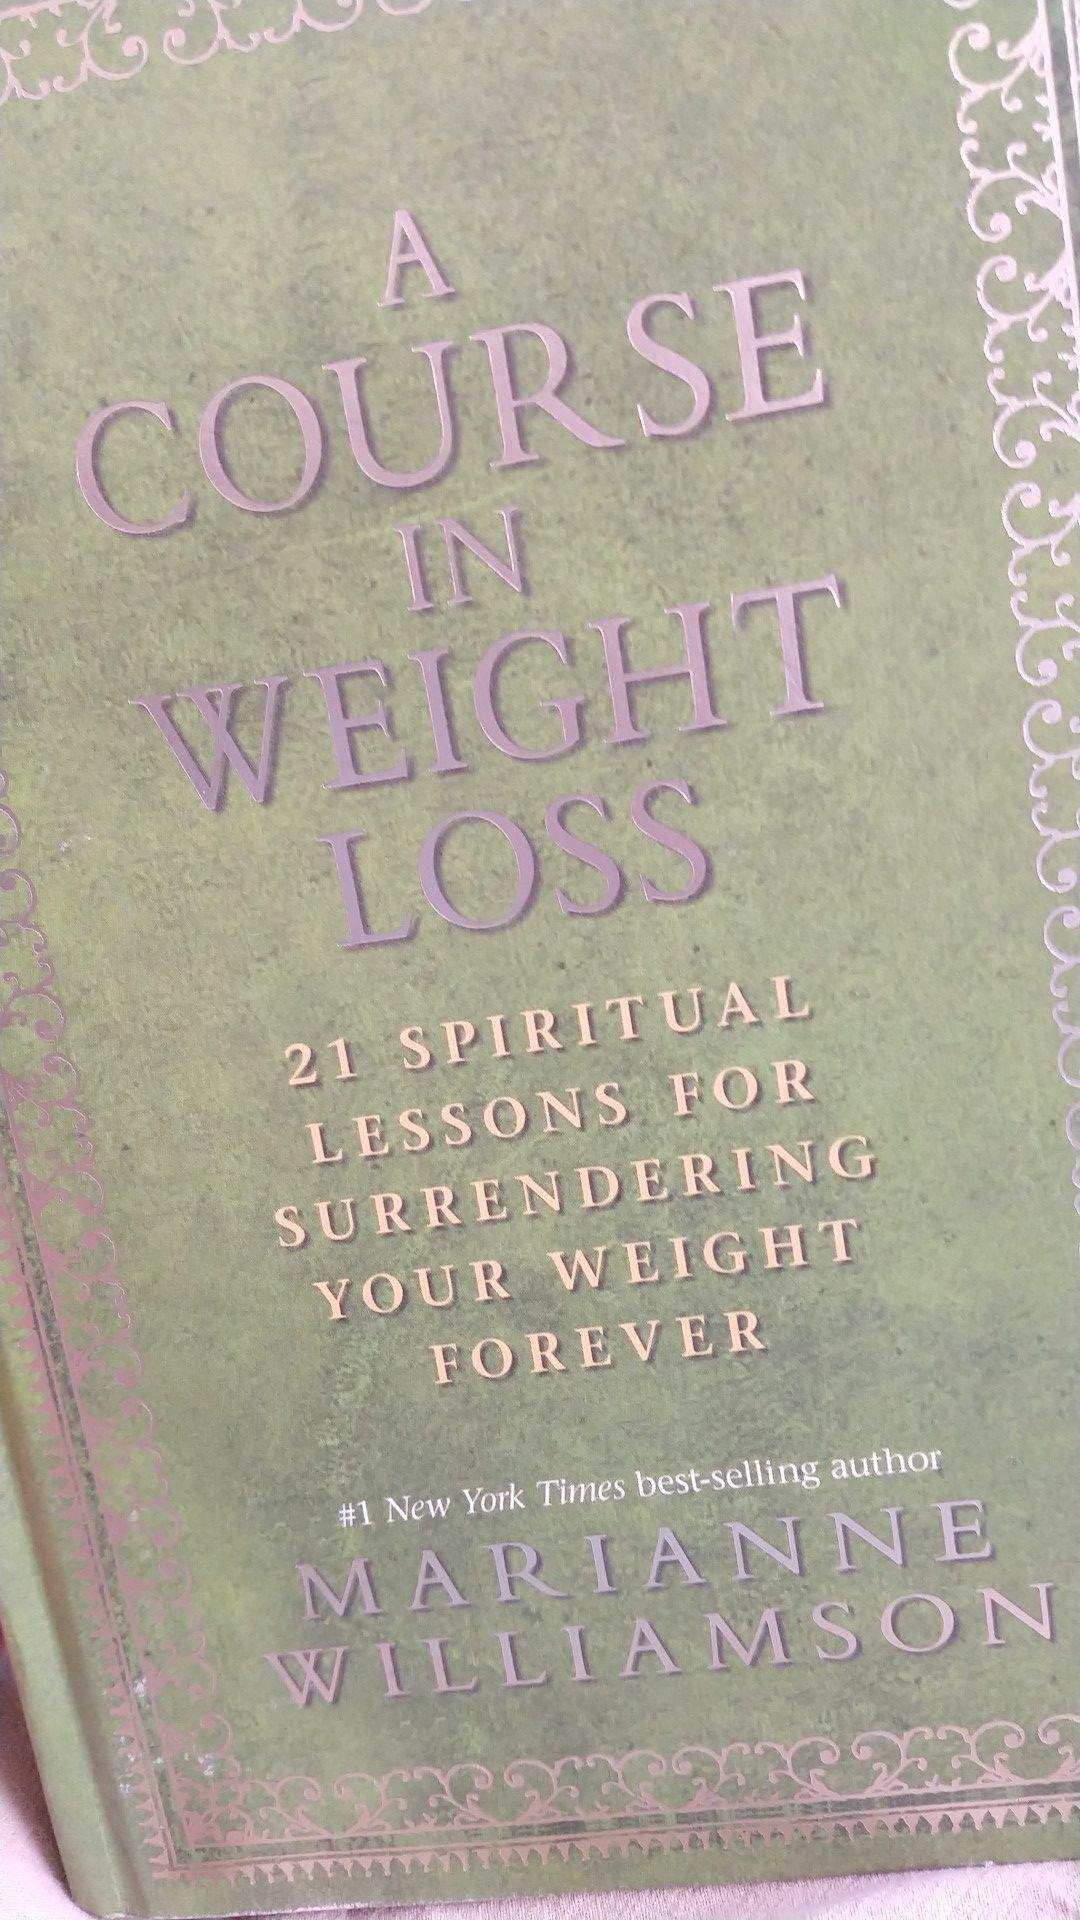 'A Course in Weight Loss' by Marianne Williamson